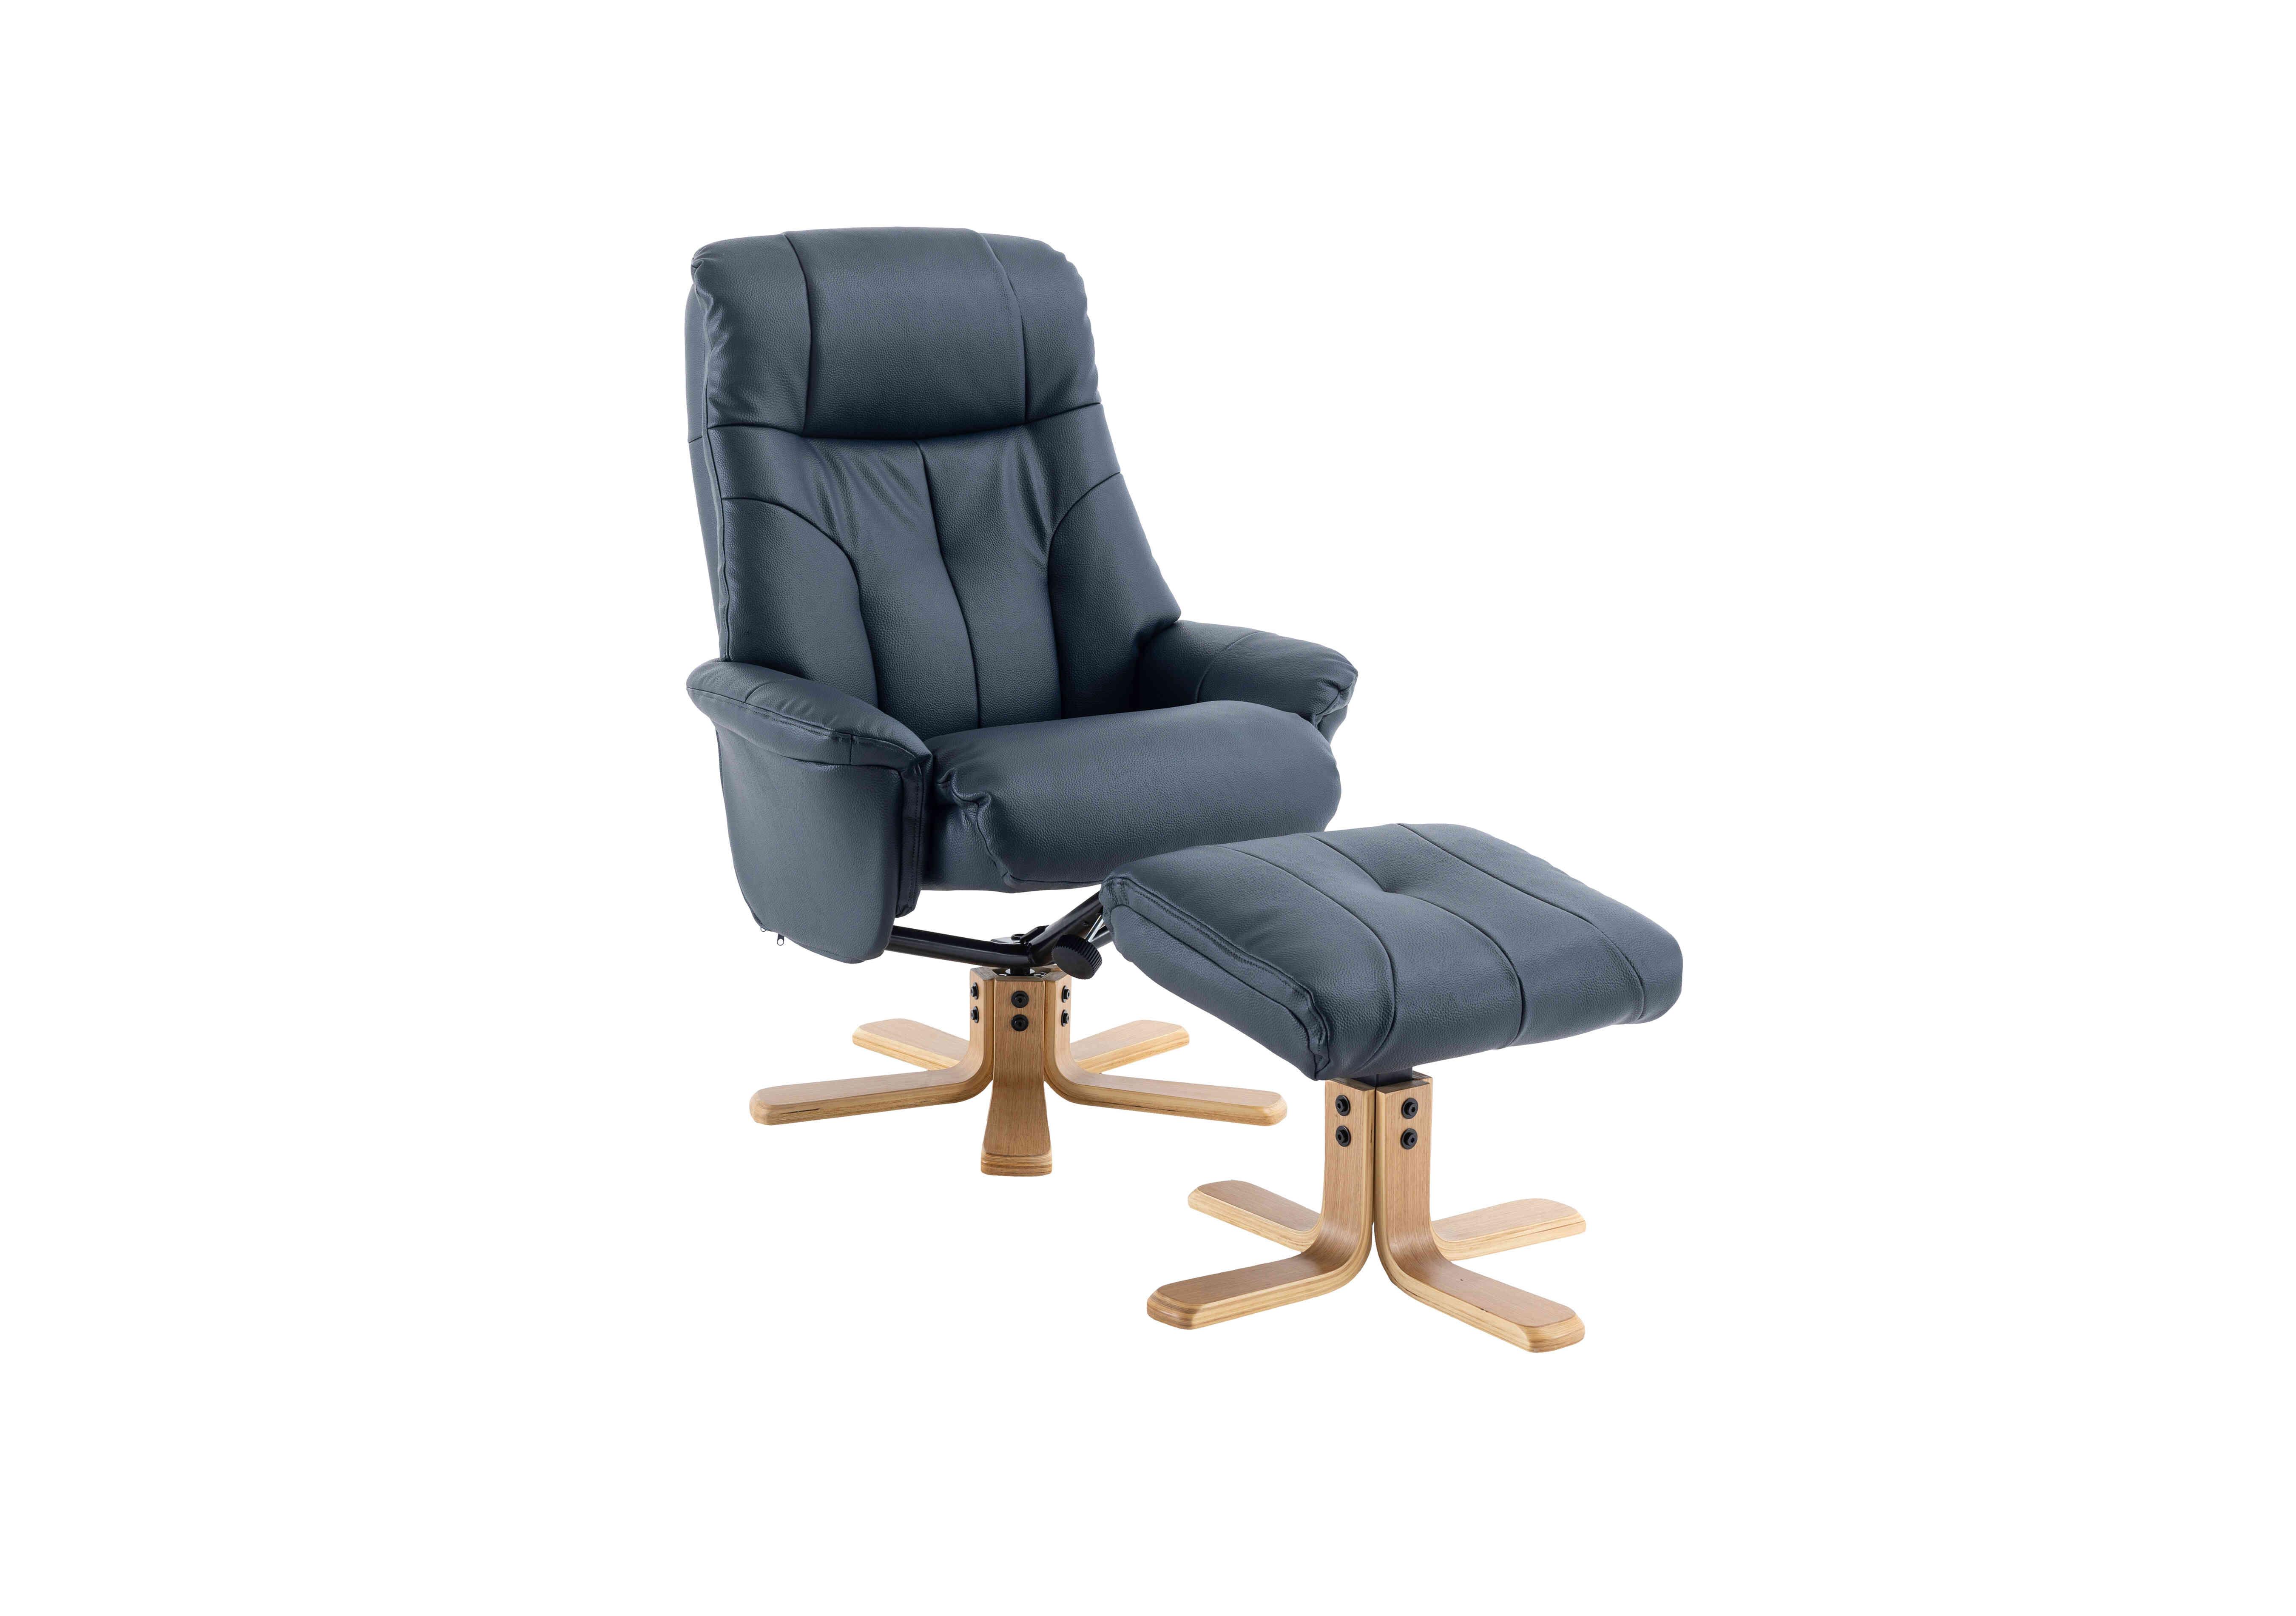 Muscat Faux Leather Swivel Recliner Chair and Footstool in Navy Plush on Furniture Village